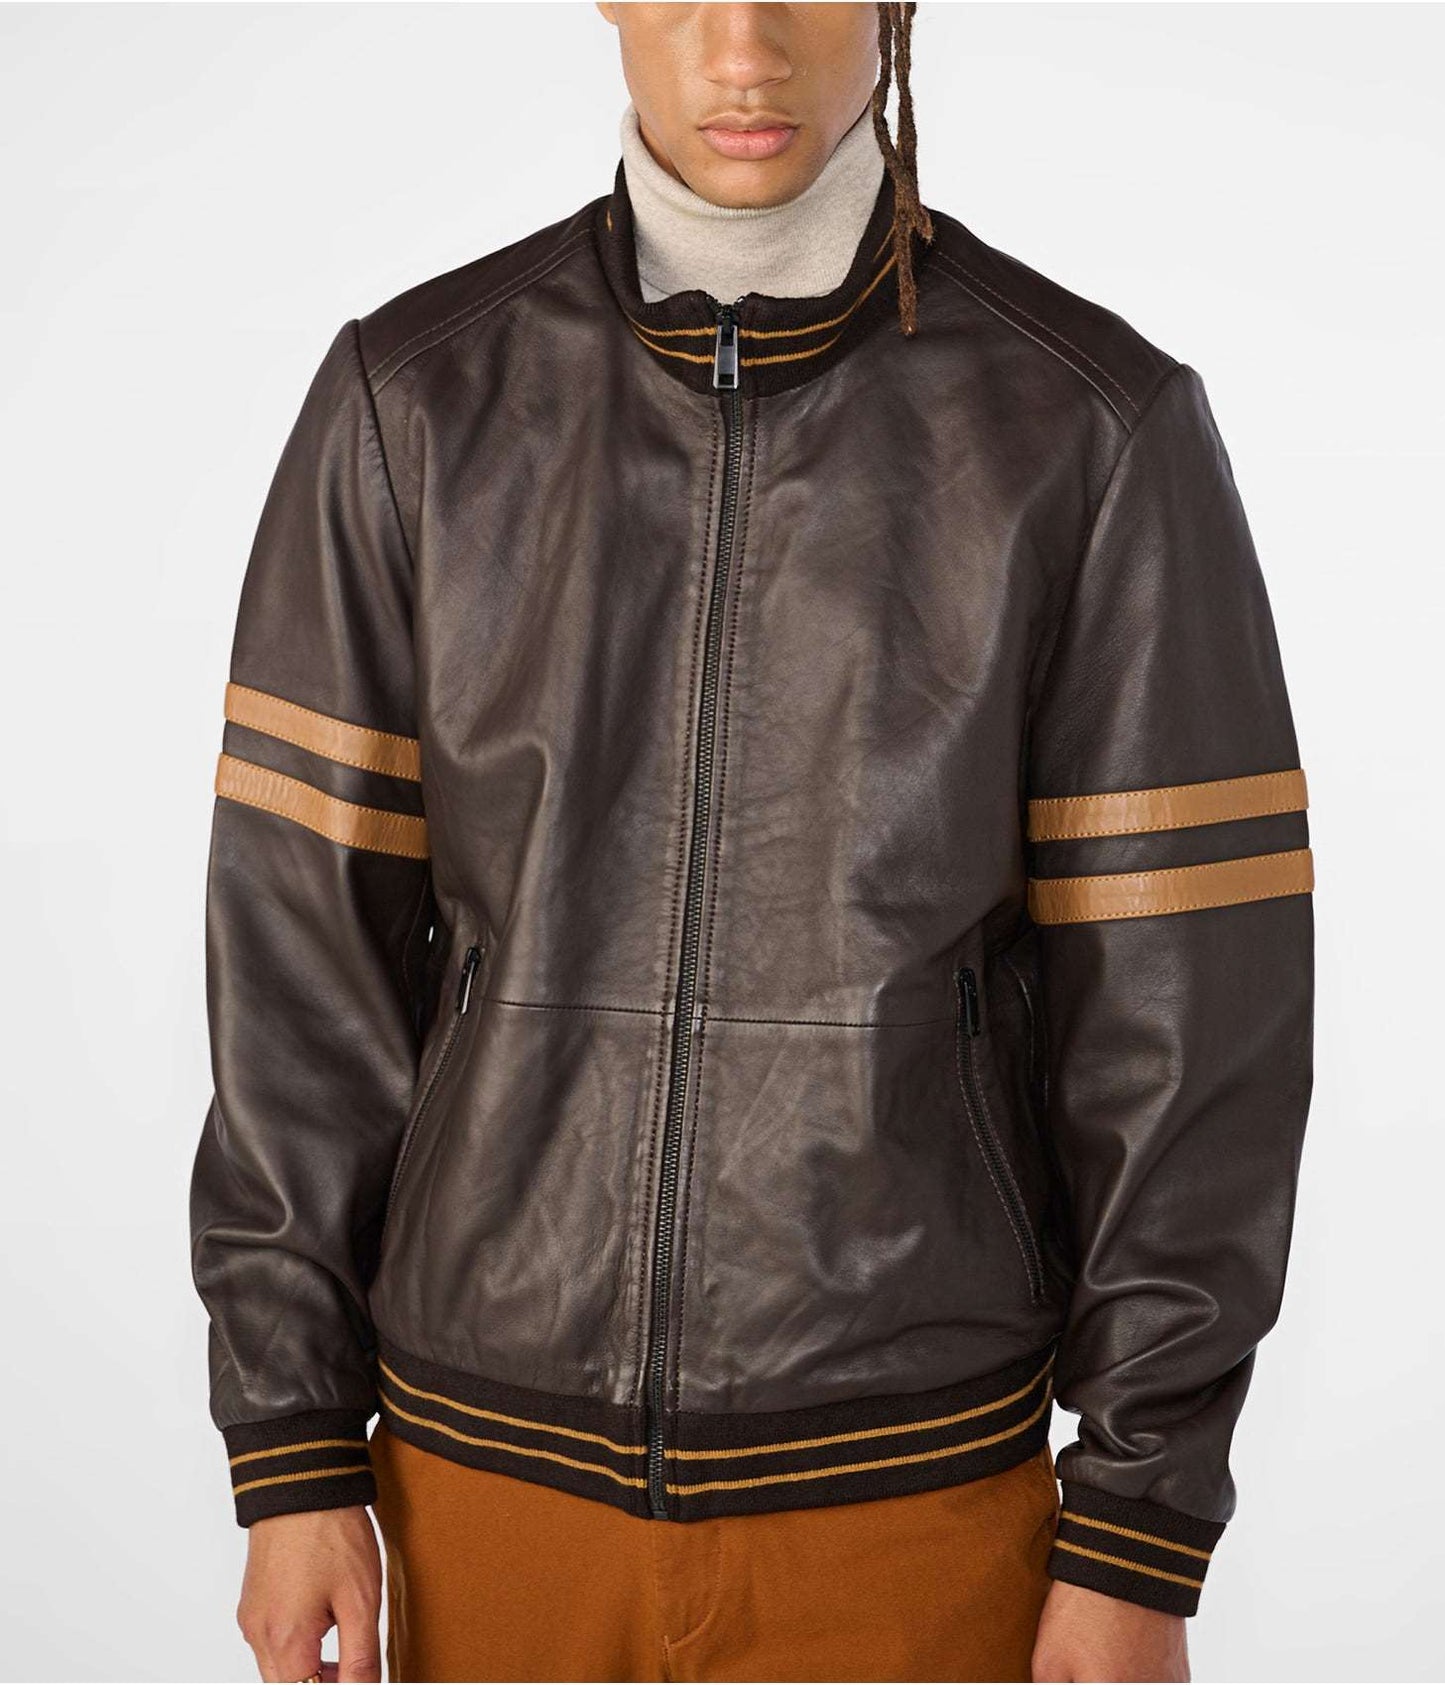 Men's Leather Bomber Jacket In Dark Brown With Straps